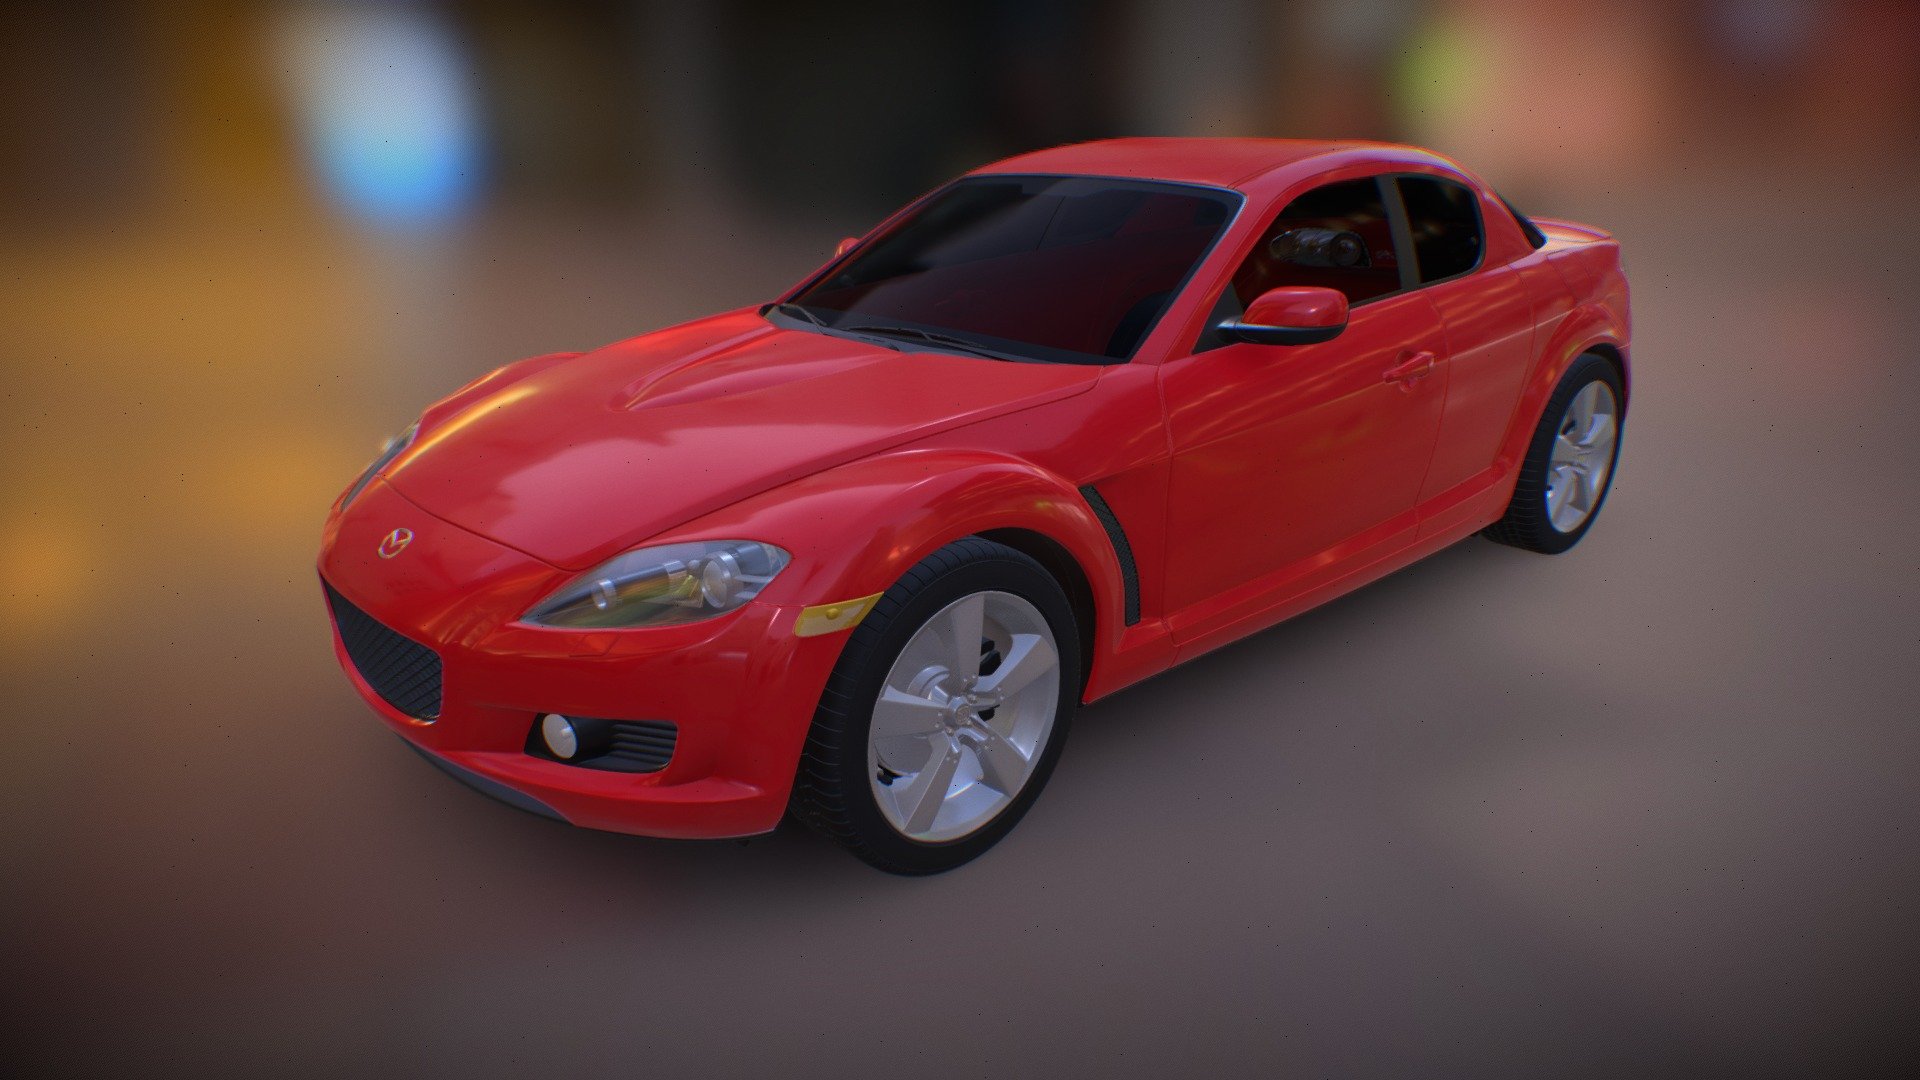 my first car-model :) - Mazda RX8 - 3D model by yoshipicture 3d model